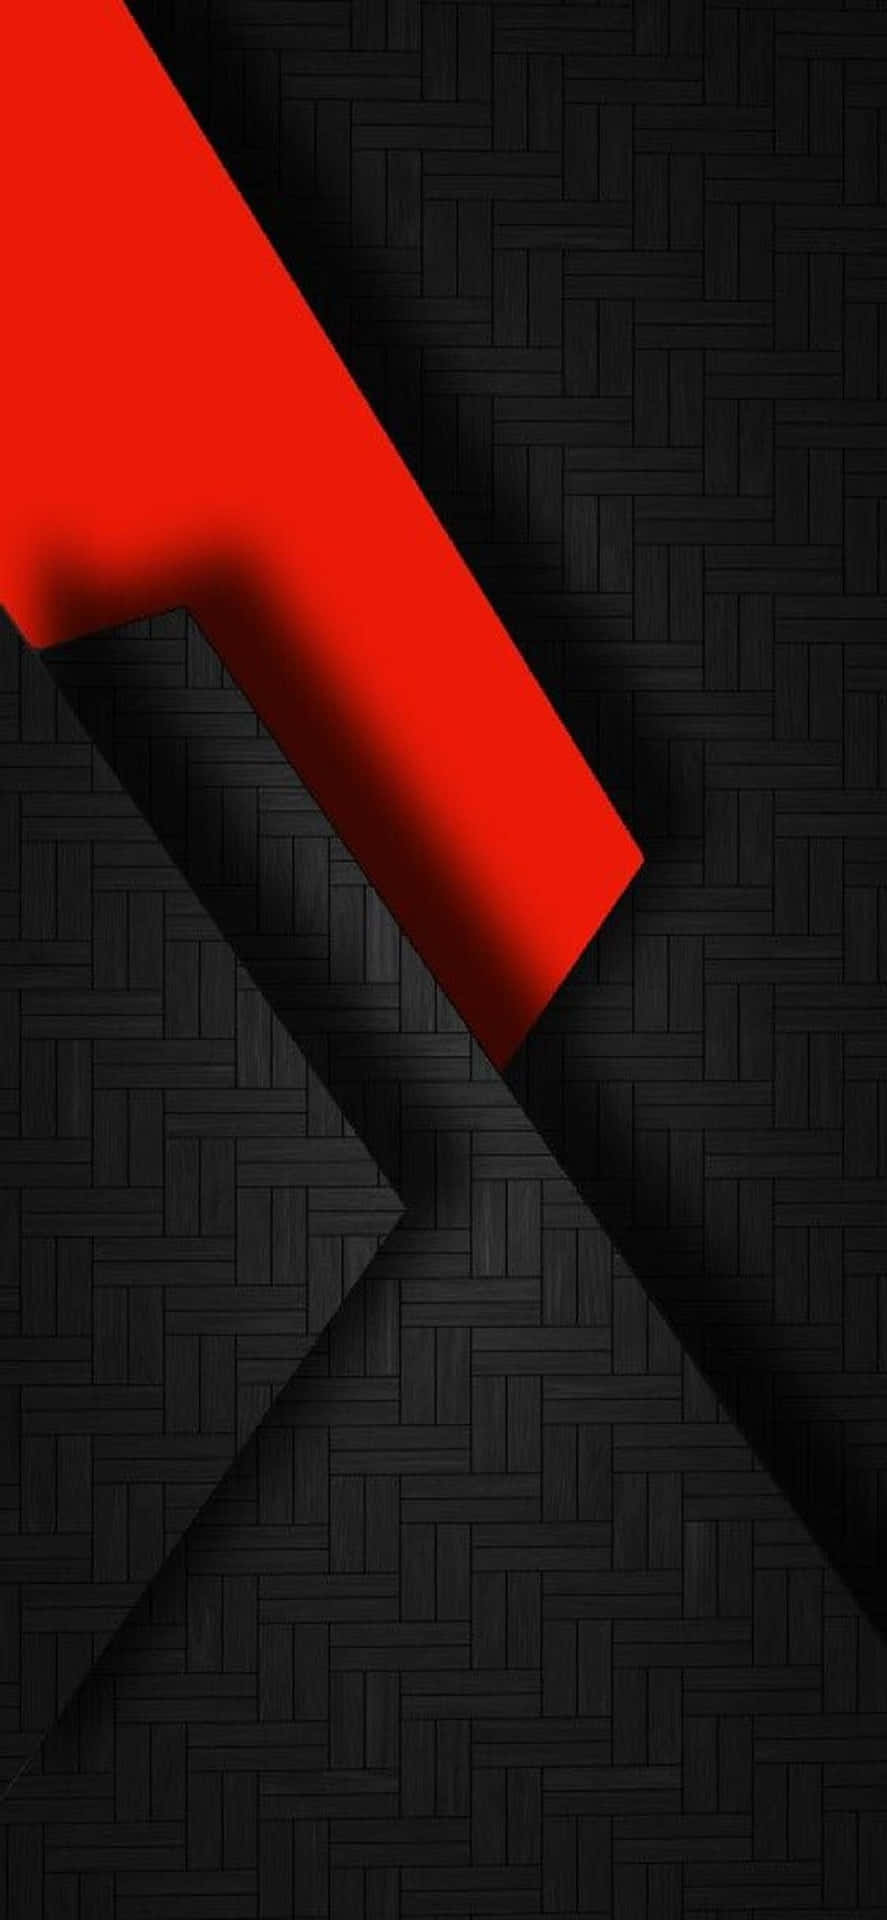 Get ready for the shiny black and red iPhone! Wallpaper